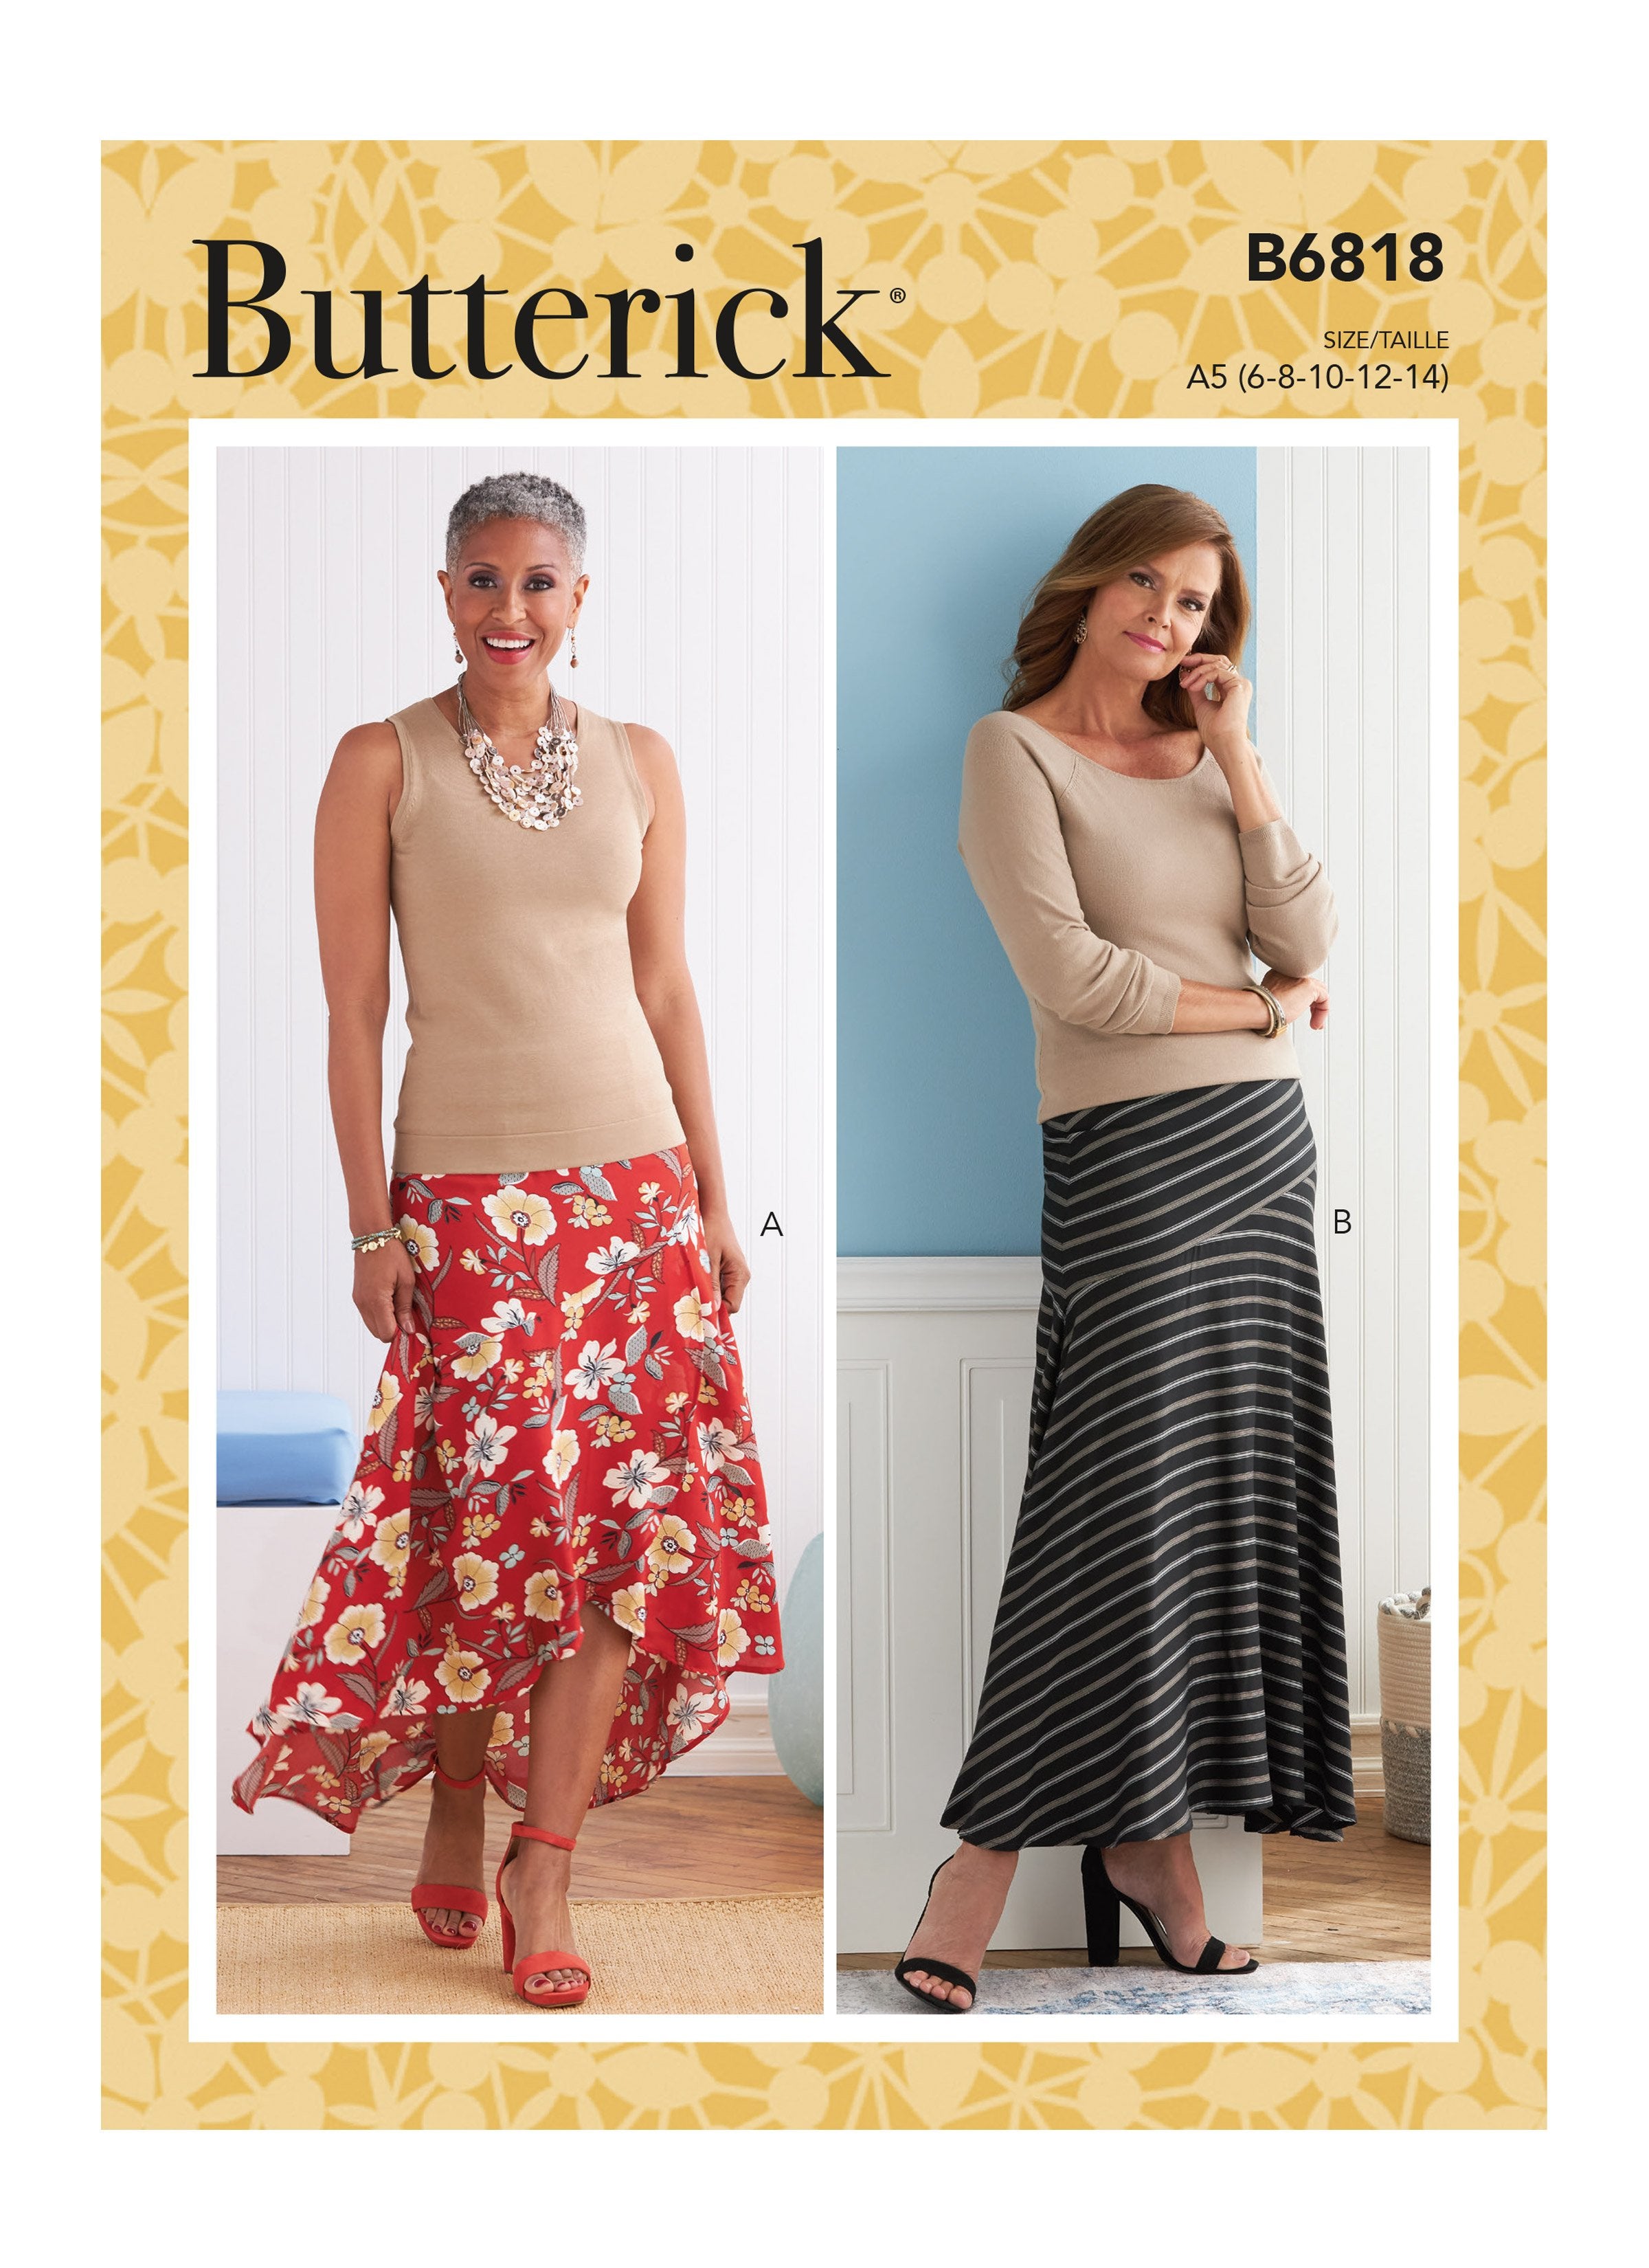 Butterick 6818 Misses Skirts pattern from Jaycotts Sewing Supplies